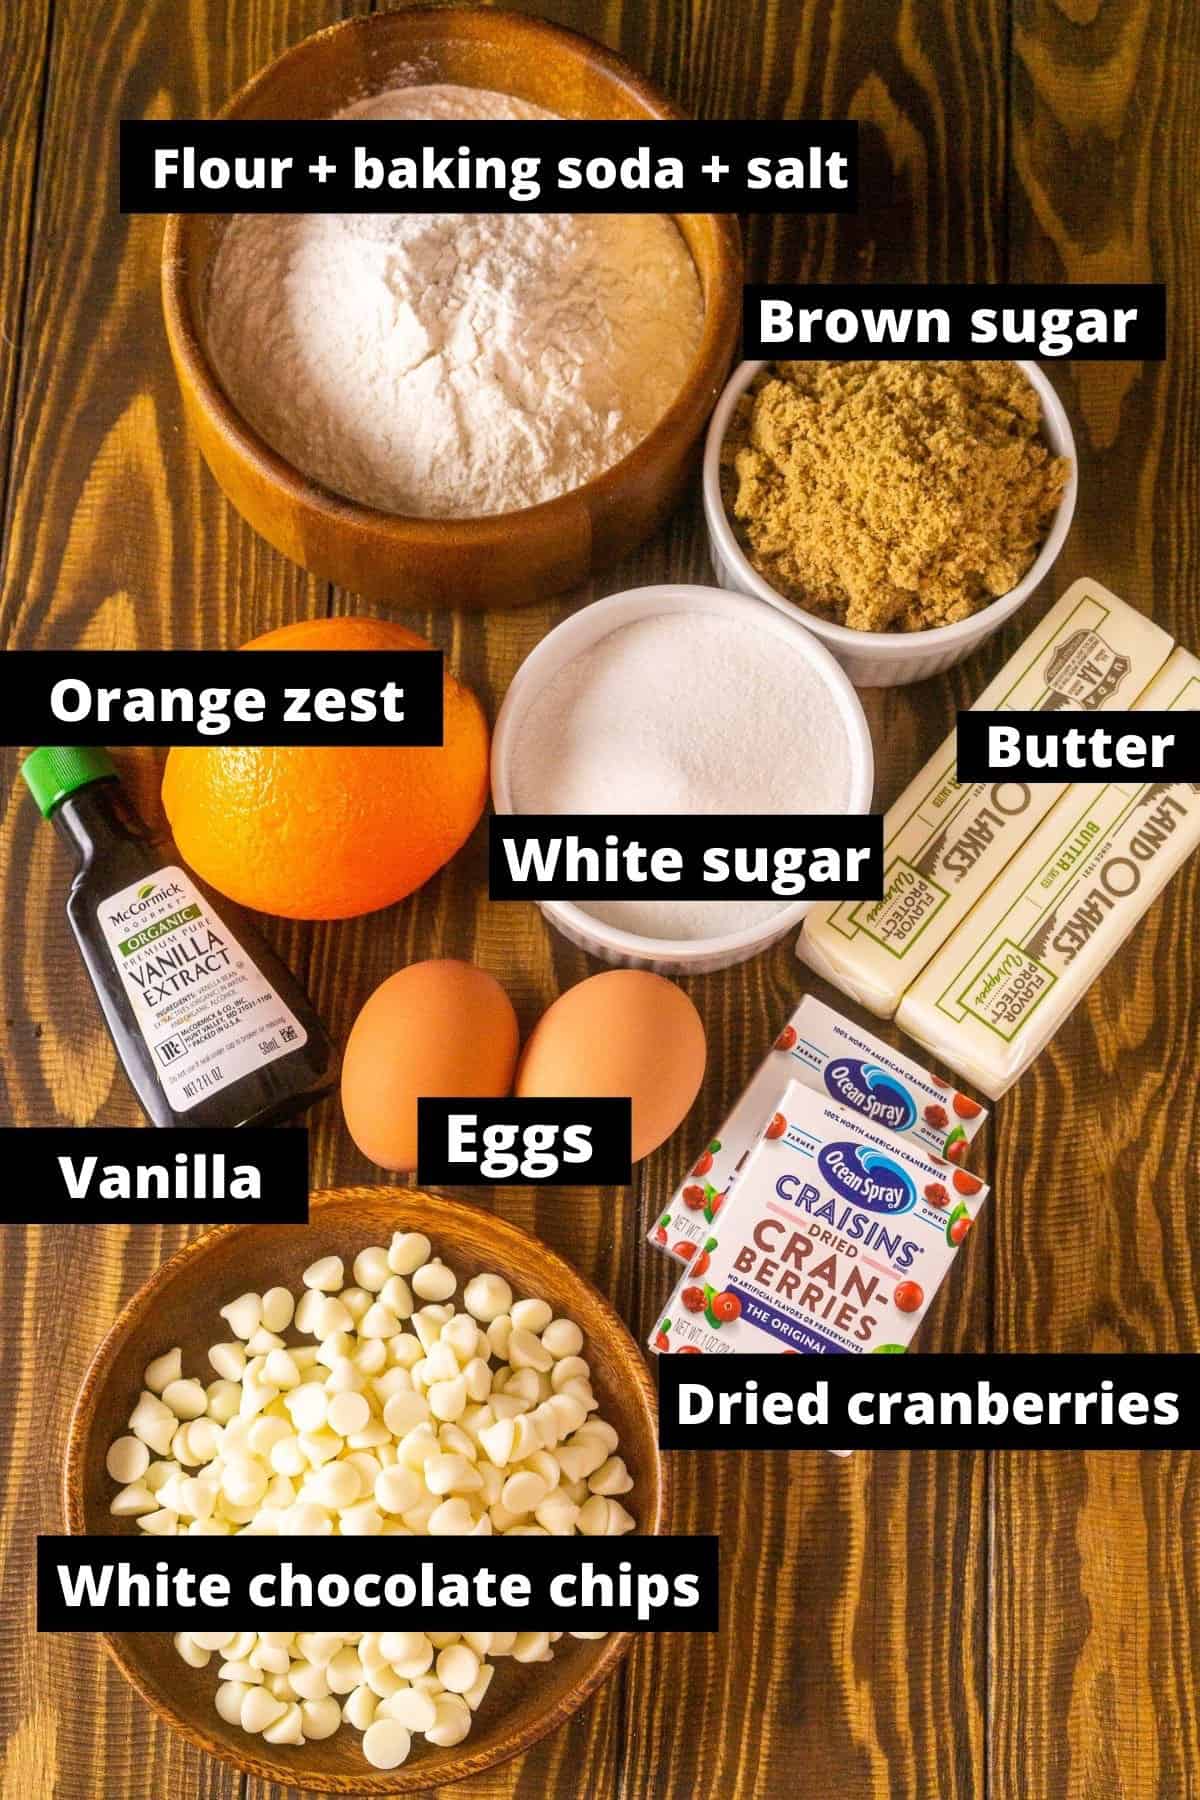 All the ingredients on a wooden board with labels.